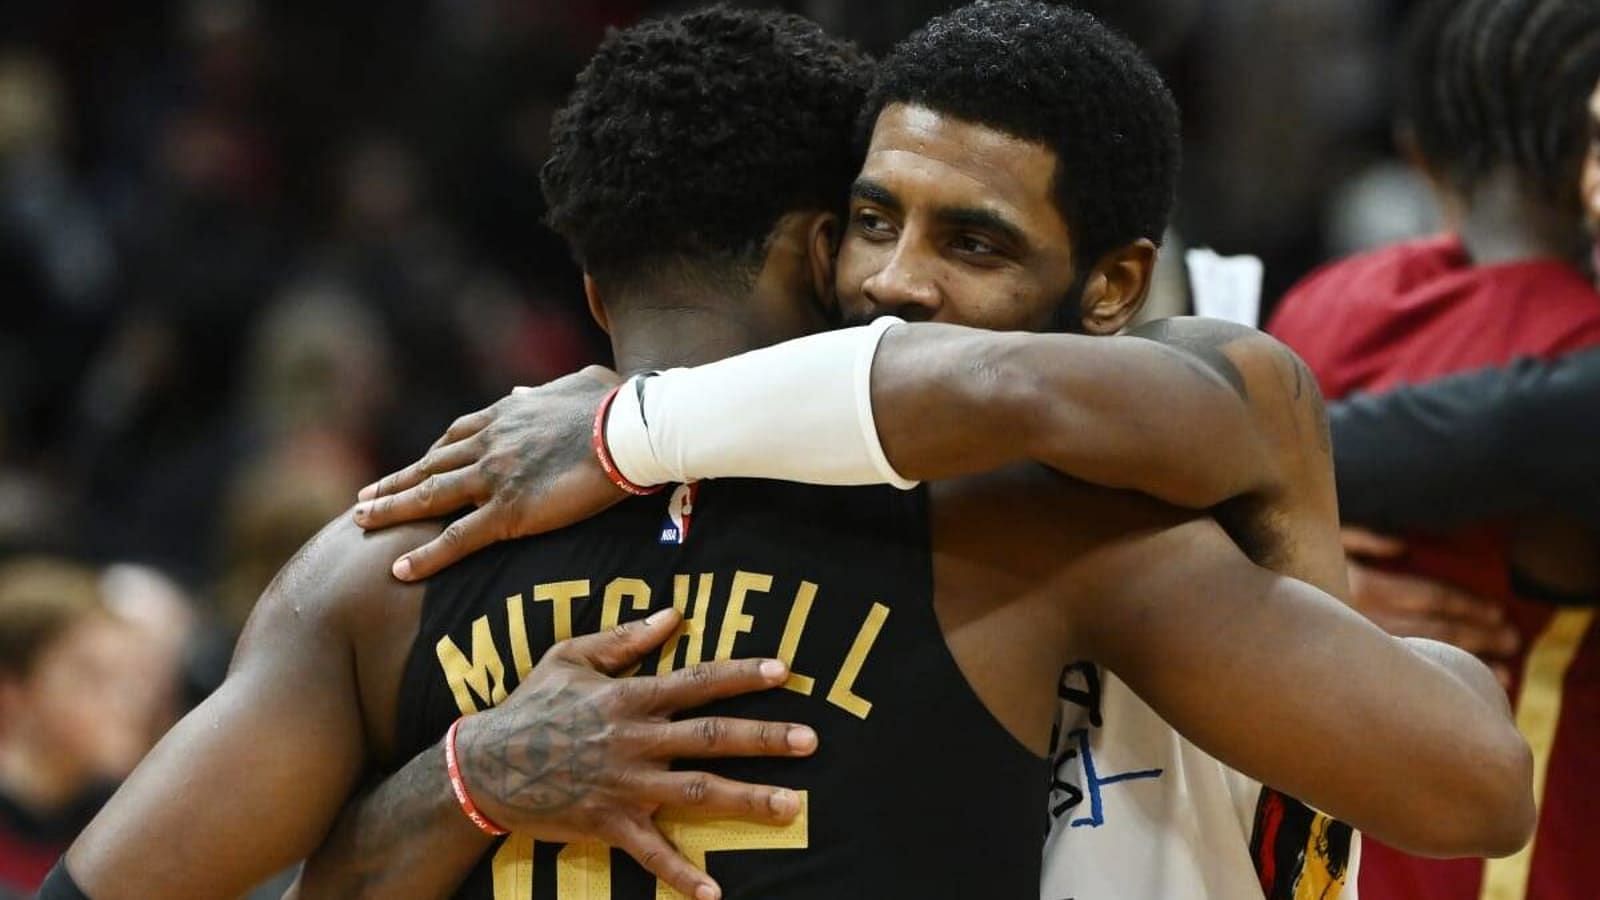 NBA stars Donovan Mitchell and Kyrie Irving